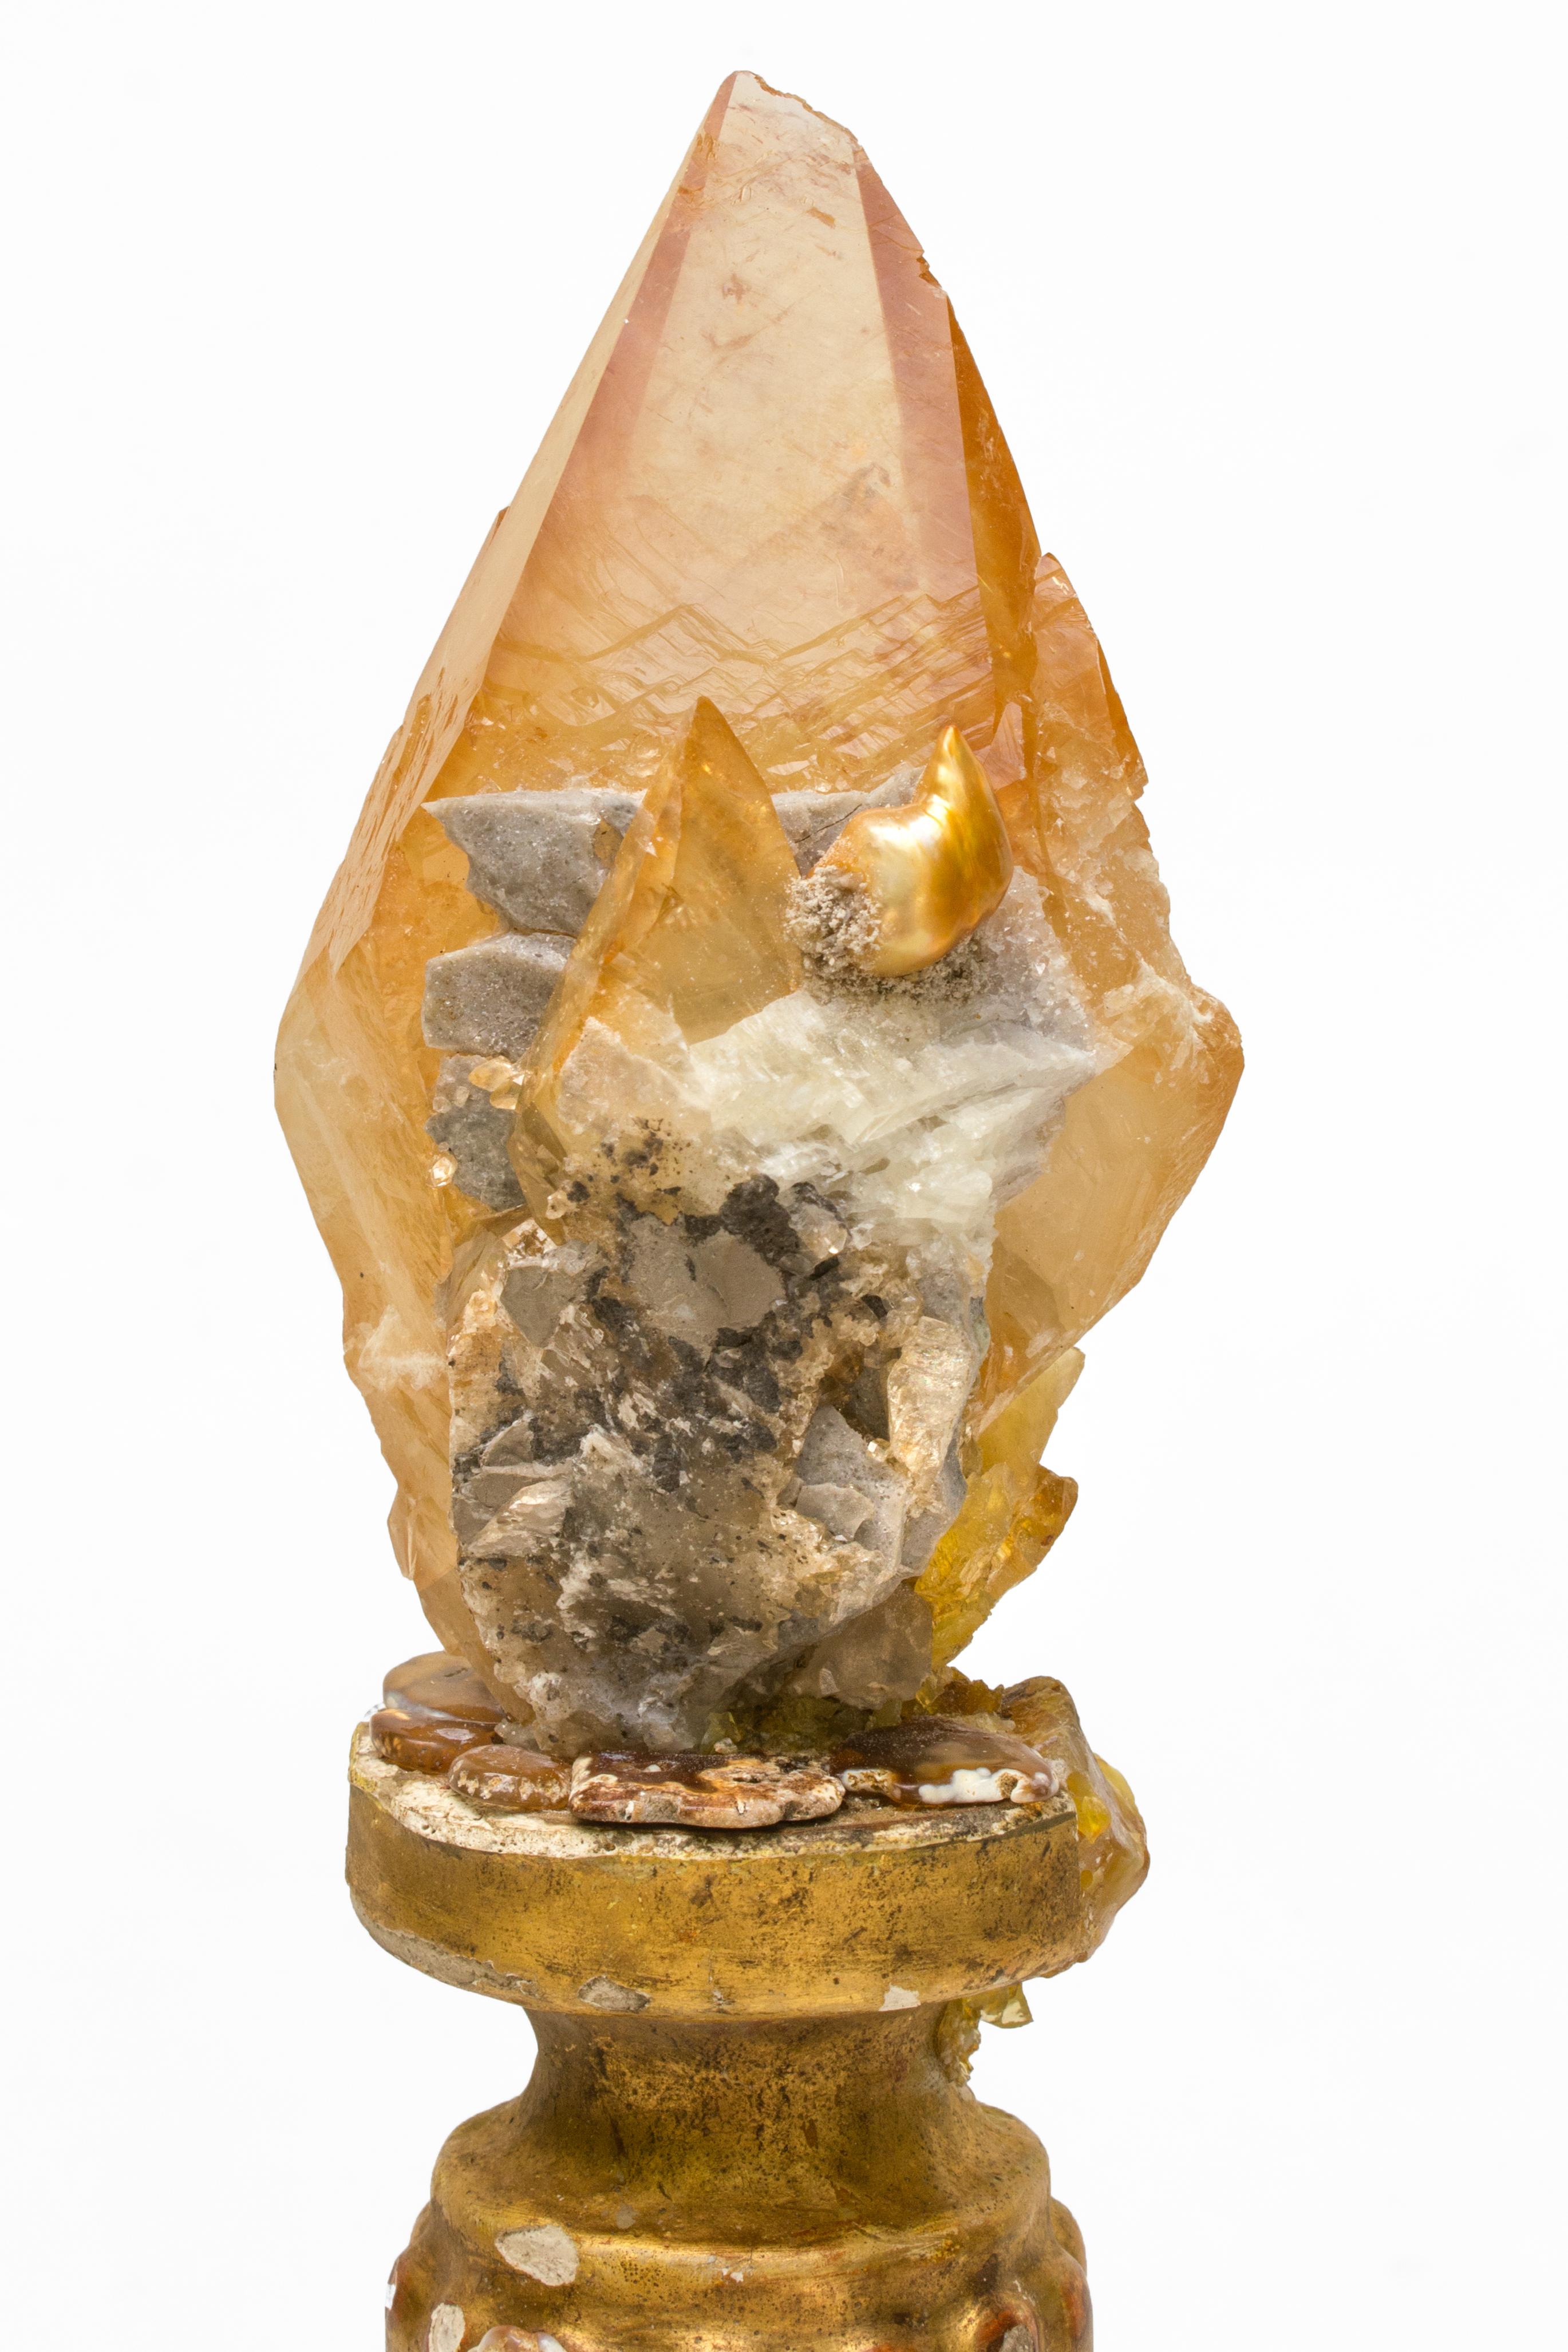 18th century Italian candlestick with a calcite crystal and a natural forming baroque pearl. The candlestick is decorated with polished agatized coral pieces and sits on a coordinating agate base.

These calcite crystals are from Elmwood Mine,